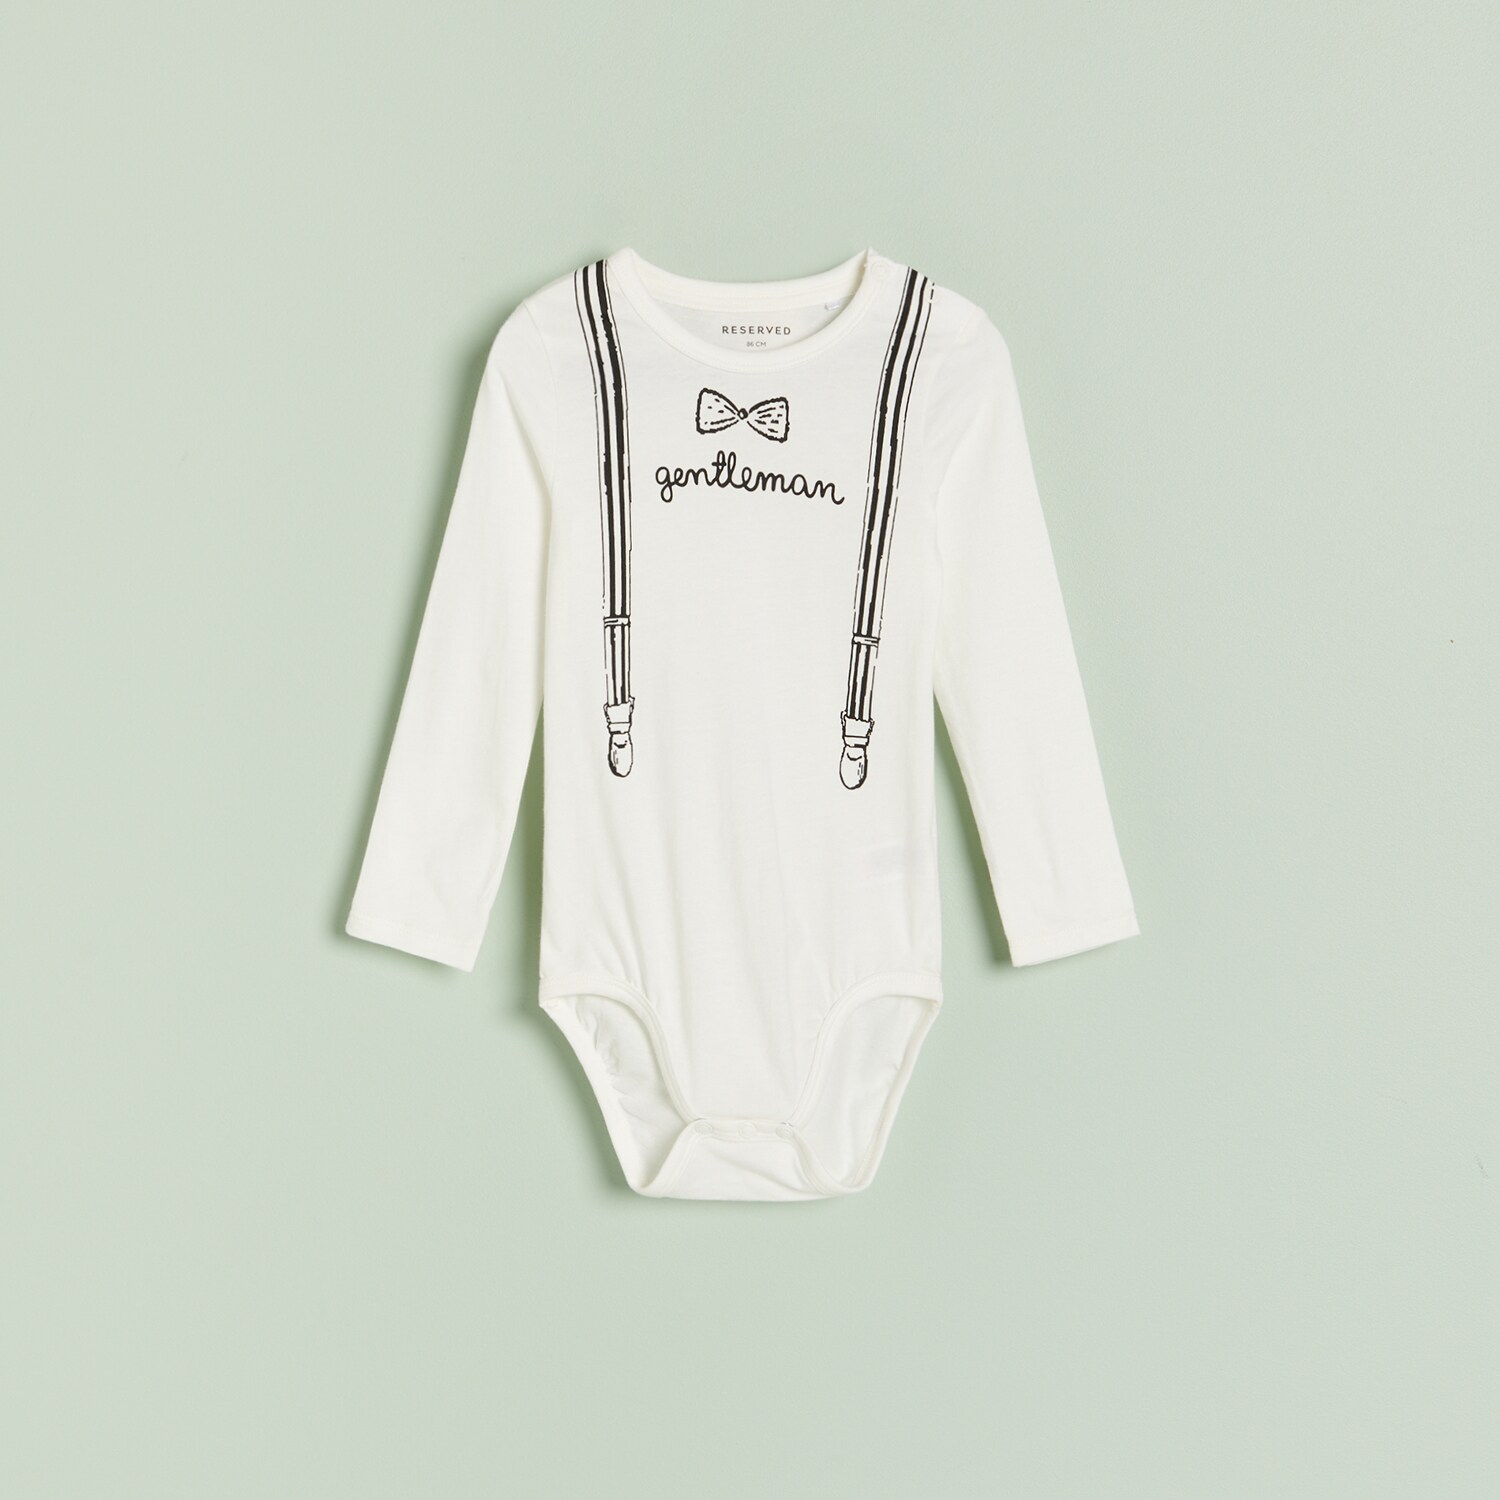 Reserved – Babies` body suit – Alb Reserved imagine noua gjx.ro